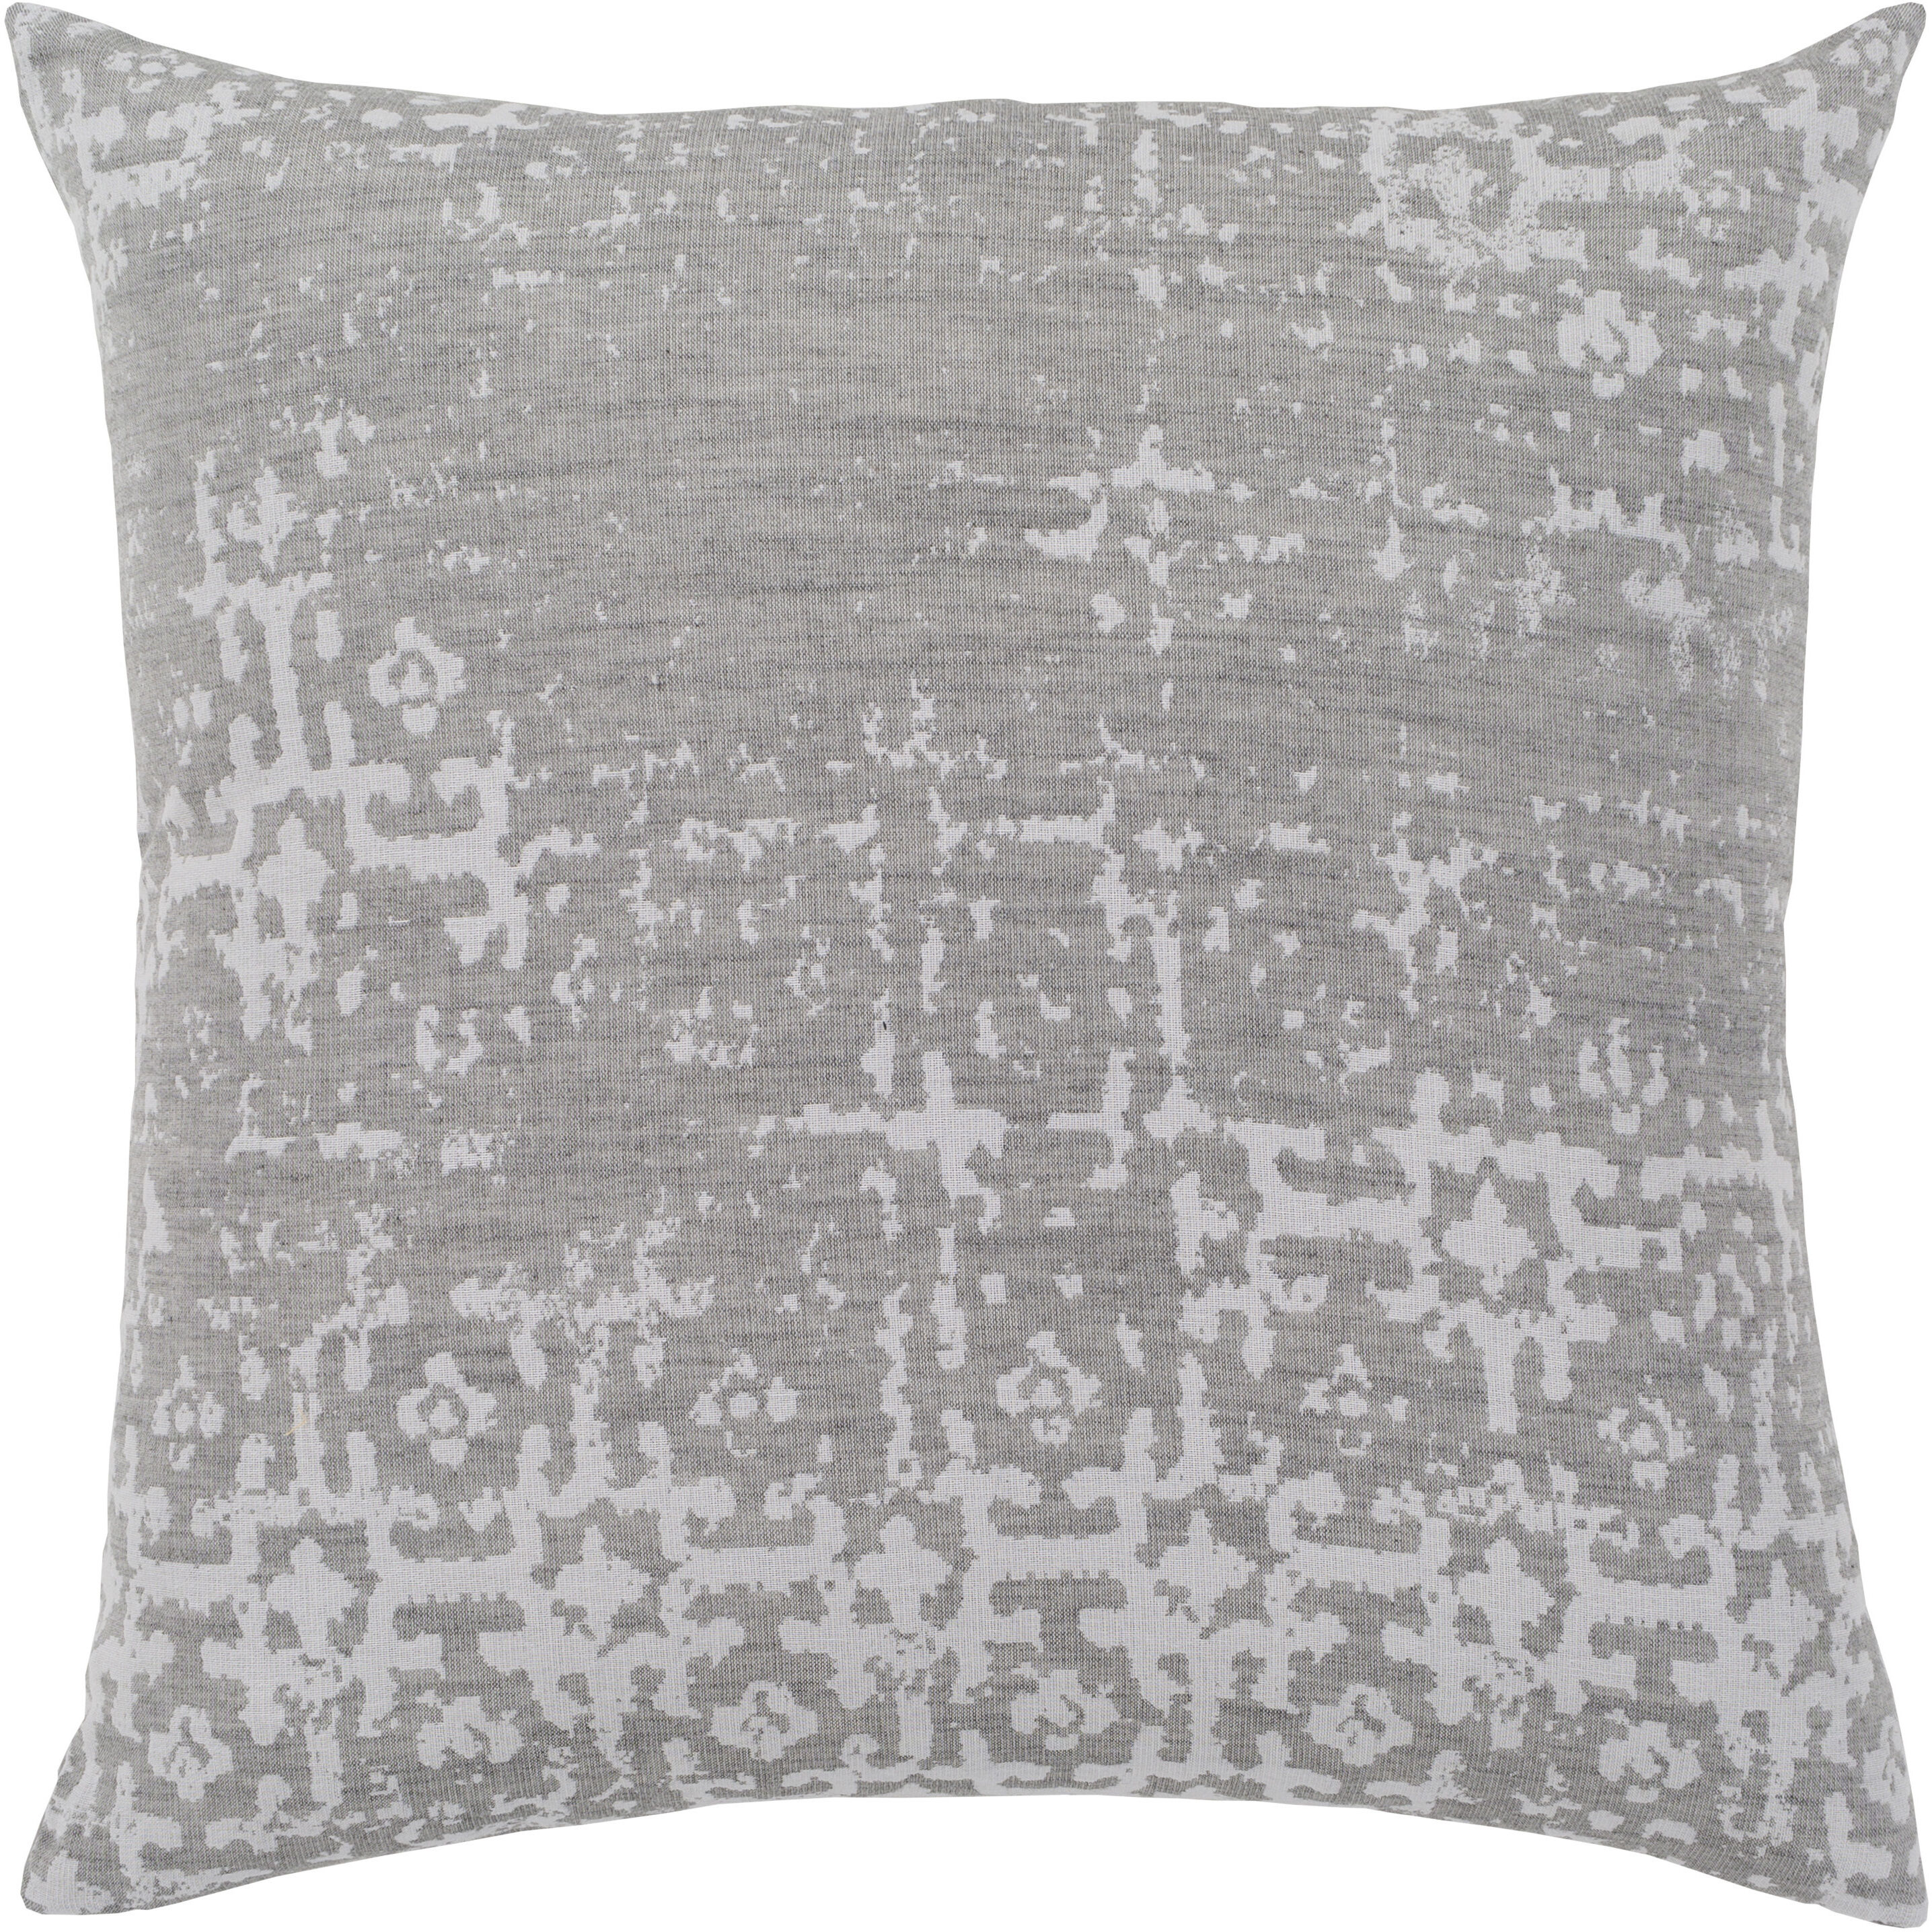 Abstraction Decorative Pillow